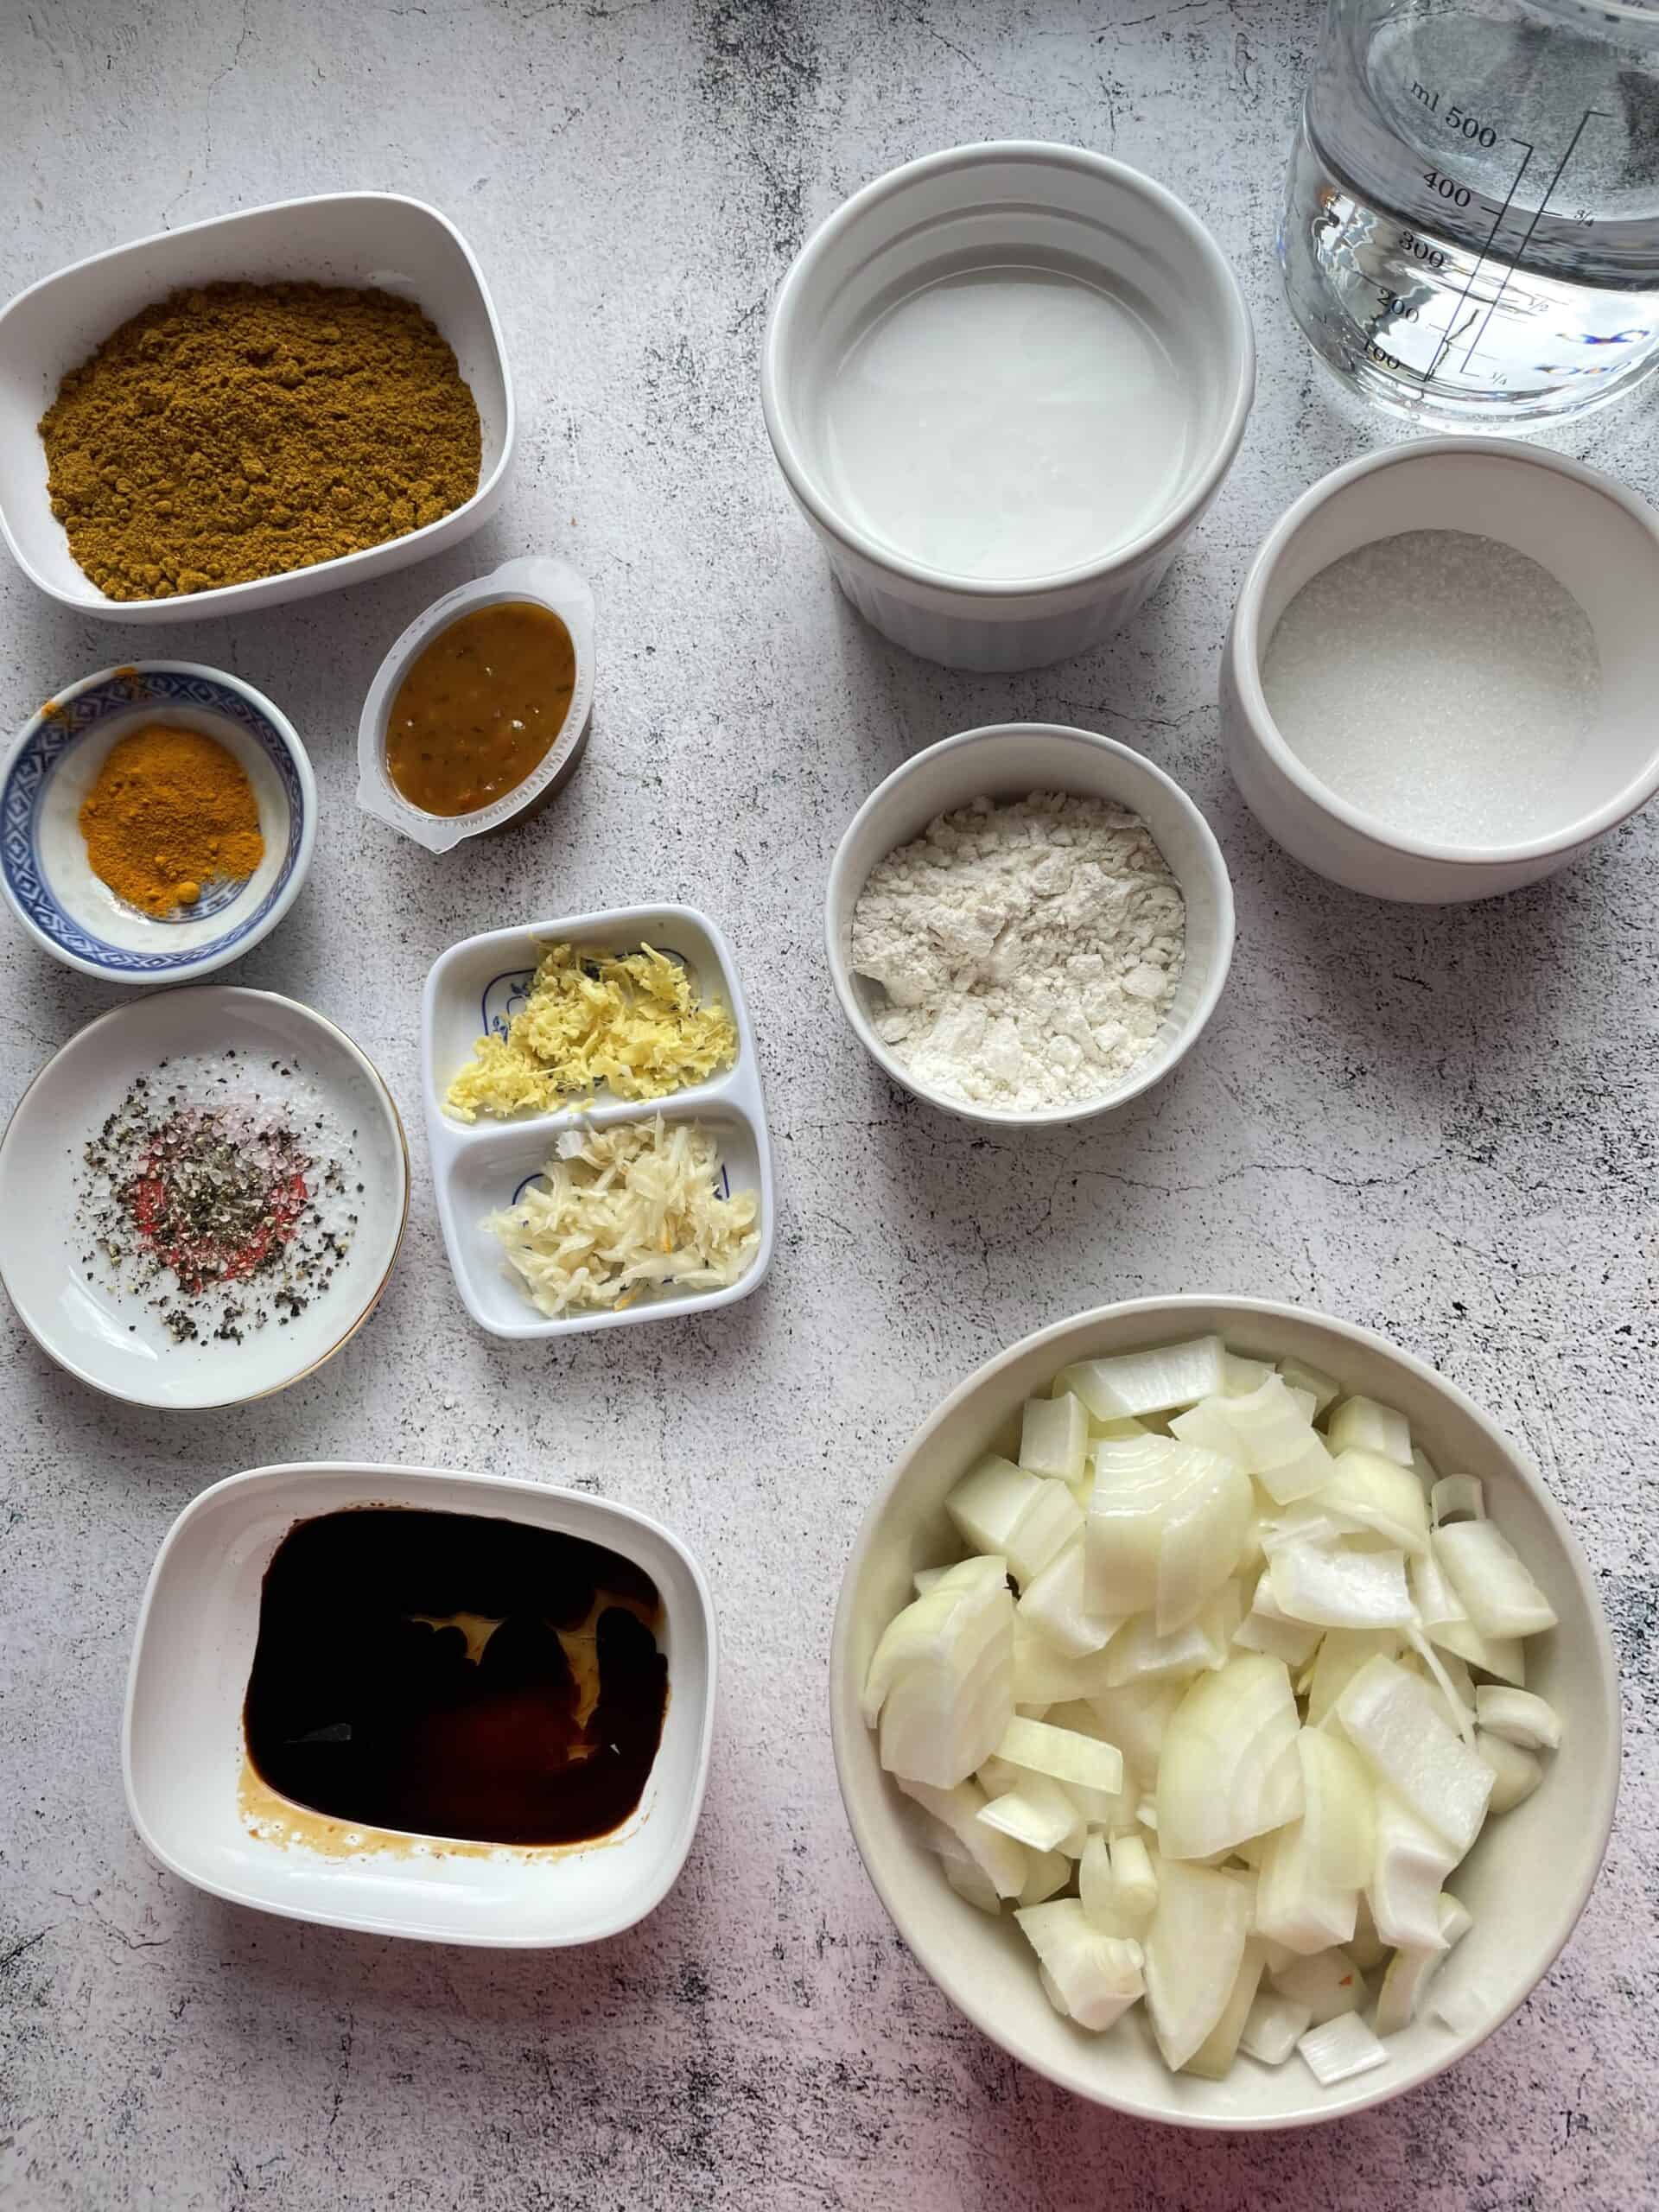 Japanese curry sauce ingredients